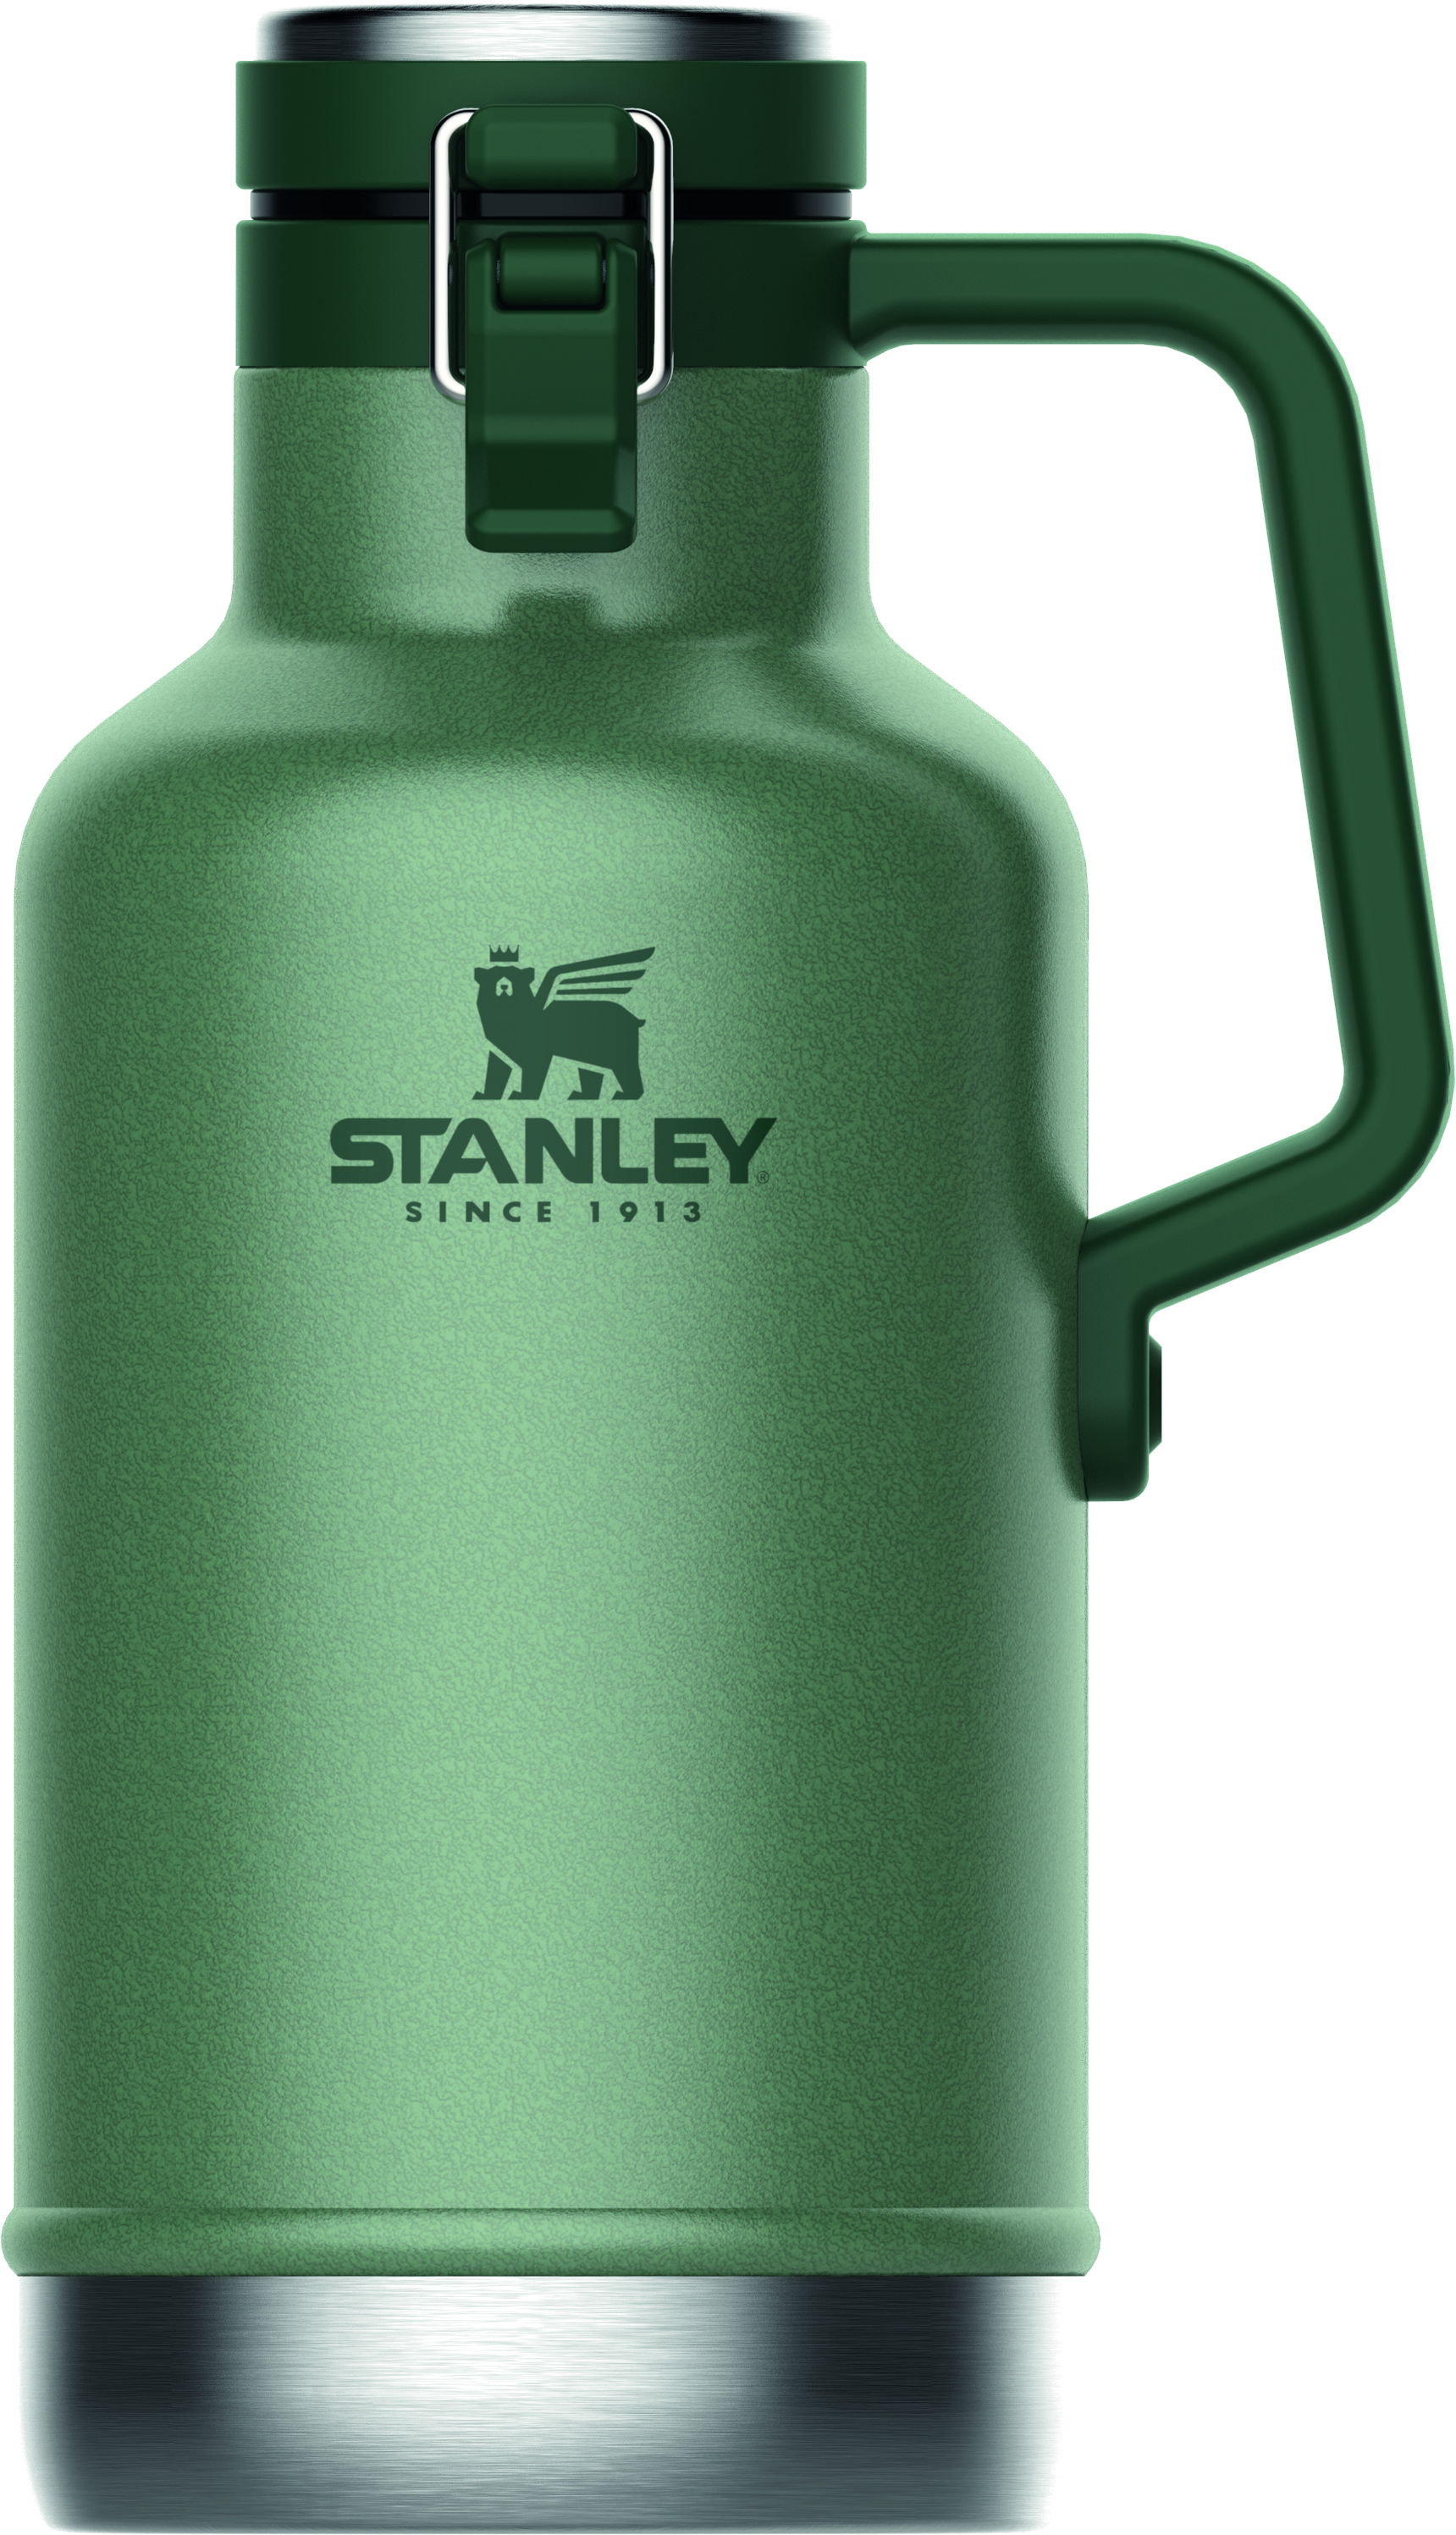 https://promotionway.com/data/shopproducts/1891/stanley-classic-easy-pour-growler-1-9-l-2.jpg